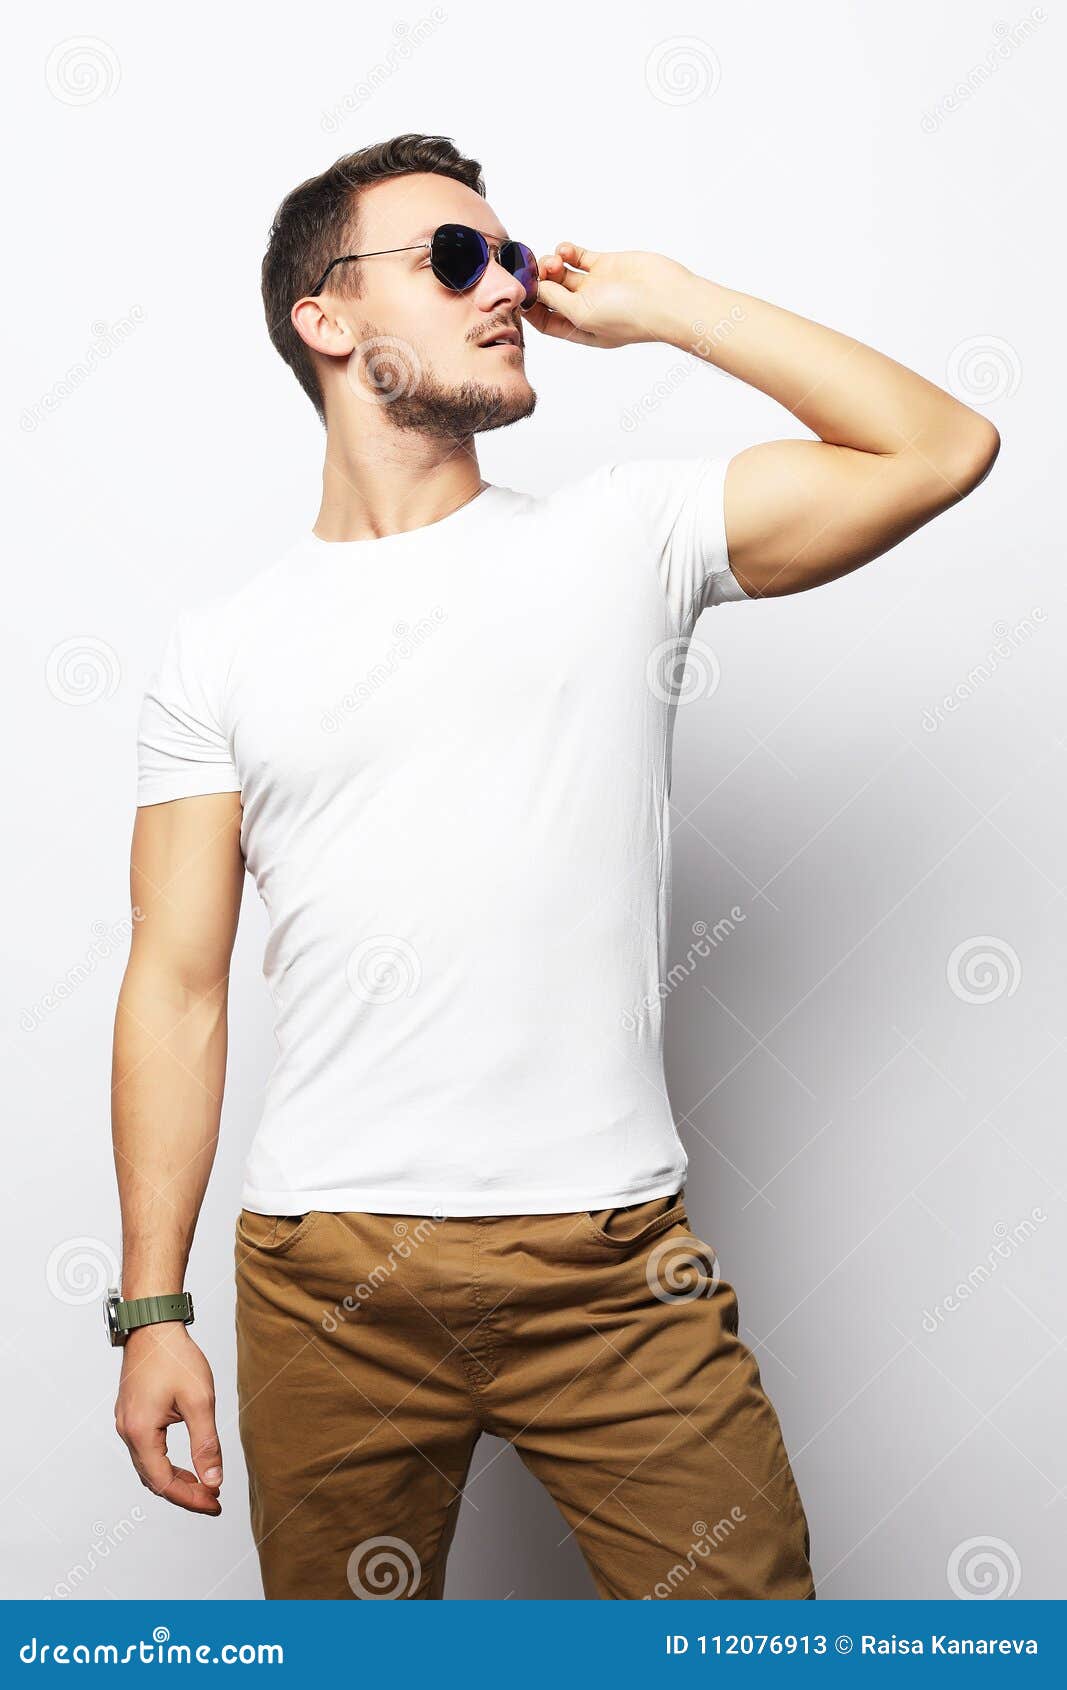 Lifestyle and People Concept: Handsome Man, Fashion Model Stock Image ...